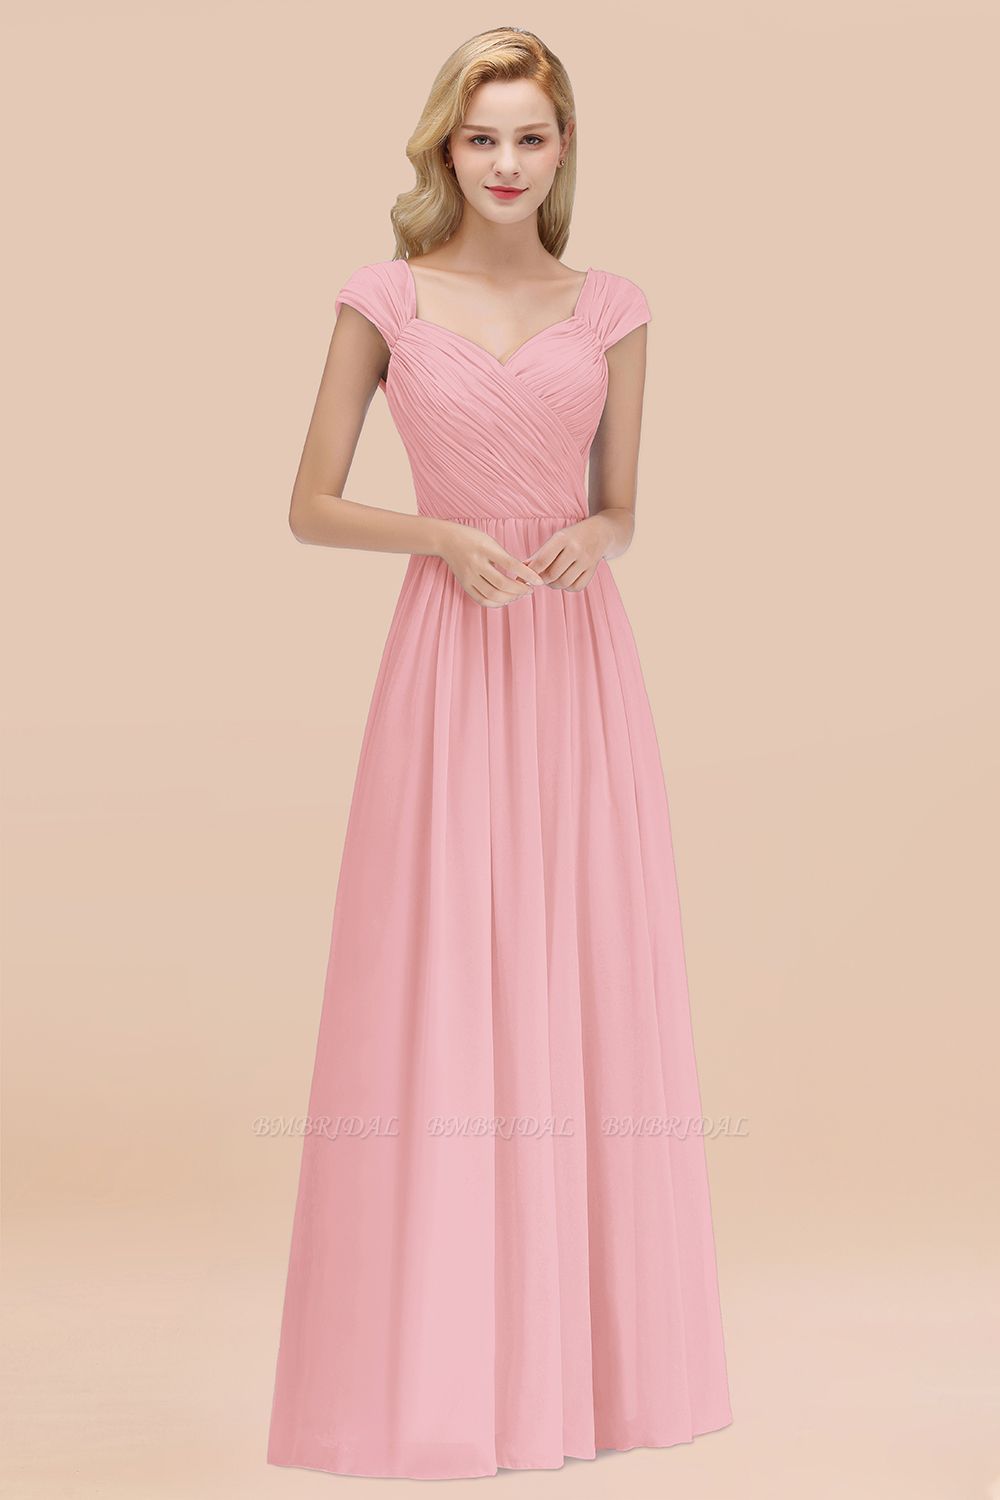 BMbridal Modest Chiffon Sweetheart Sleeveless Affordable Bridesmaid Dresses with Ruffles